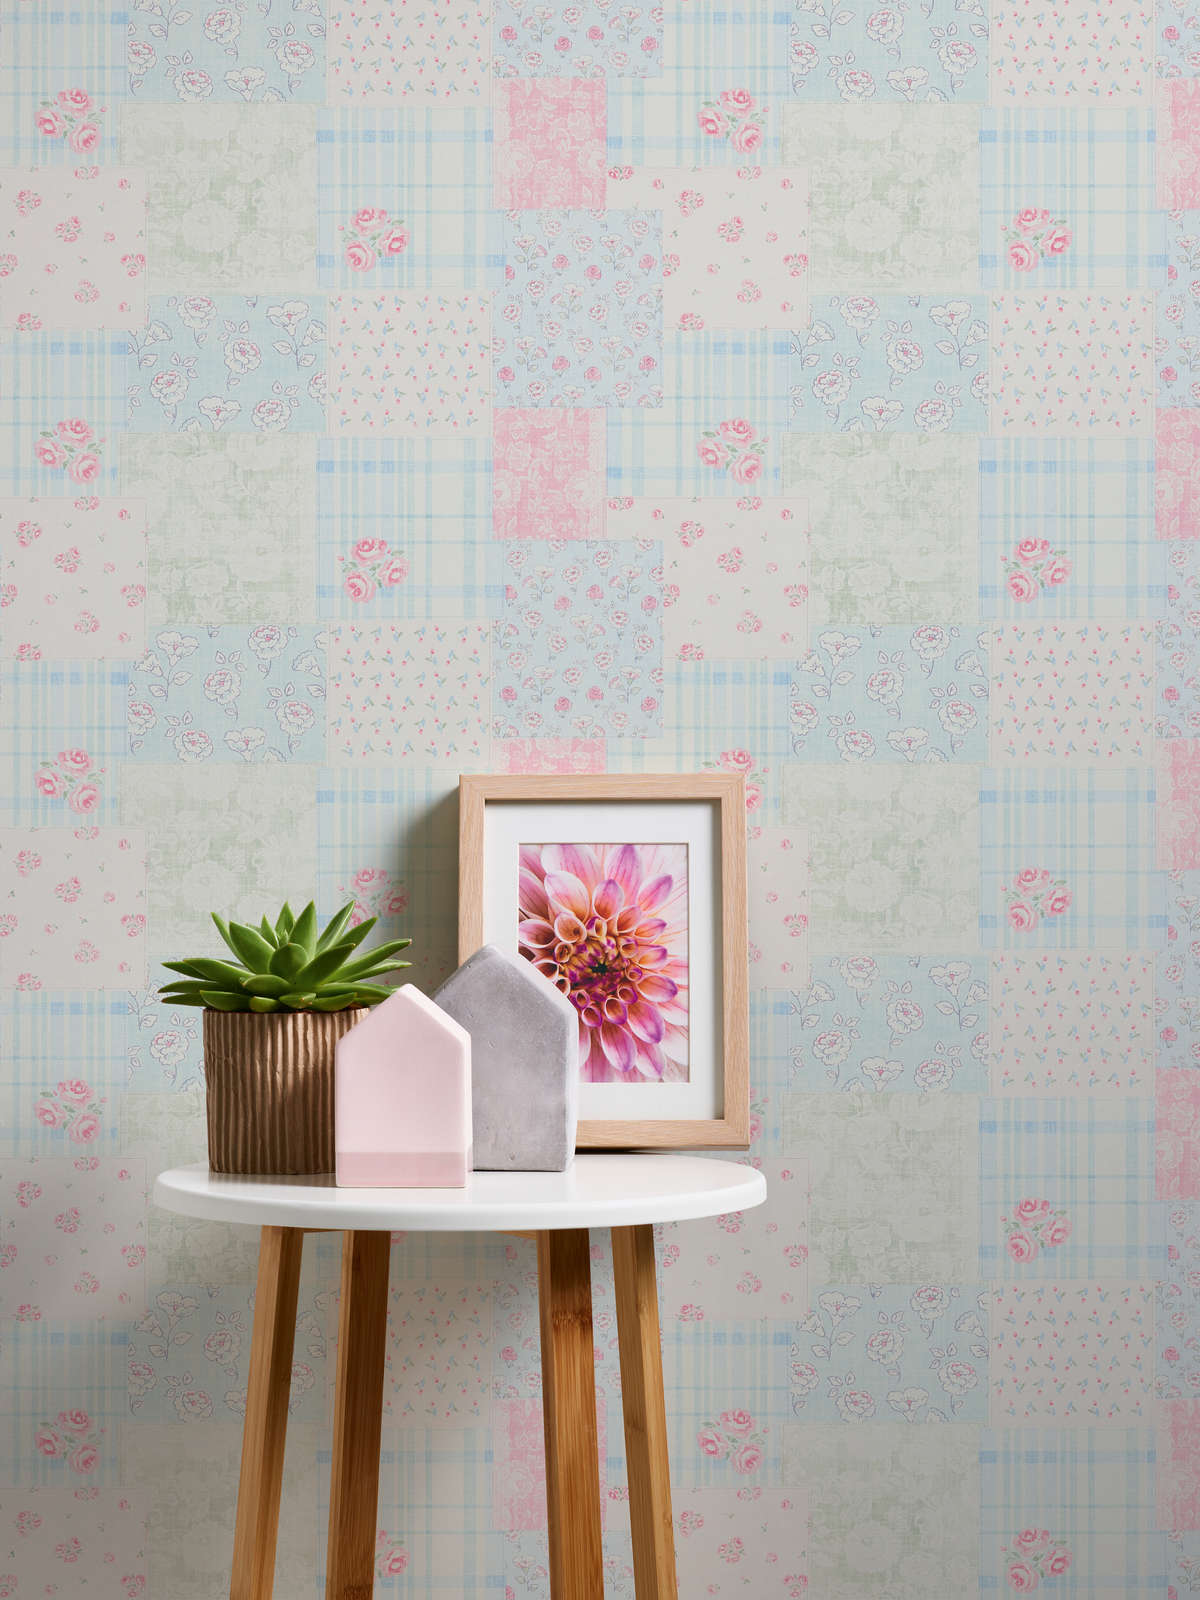             Country style non-woven wallpaper floral - blue, pink, white
        